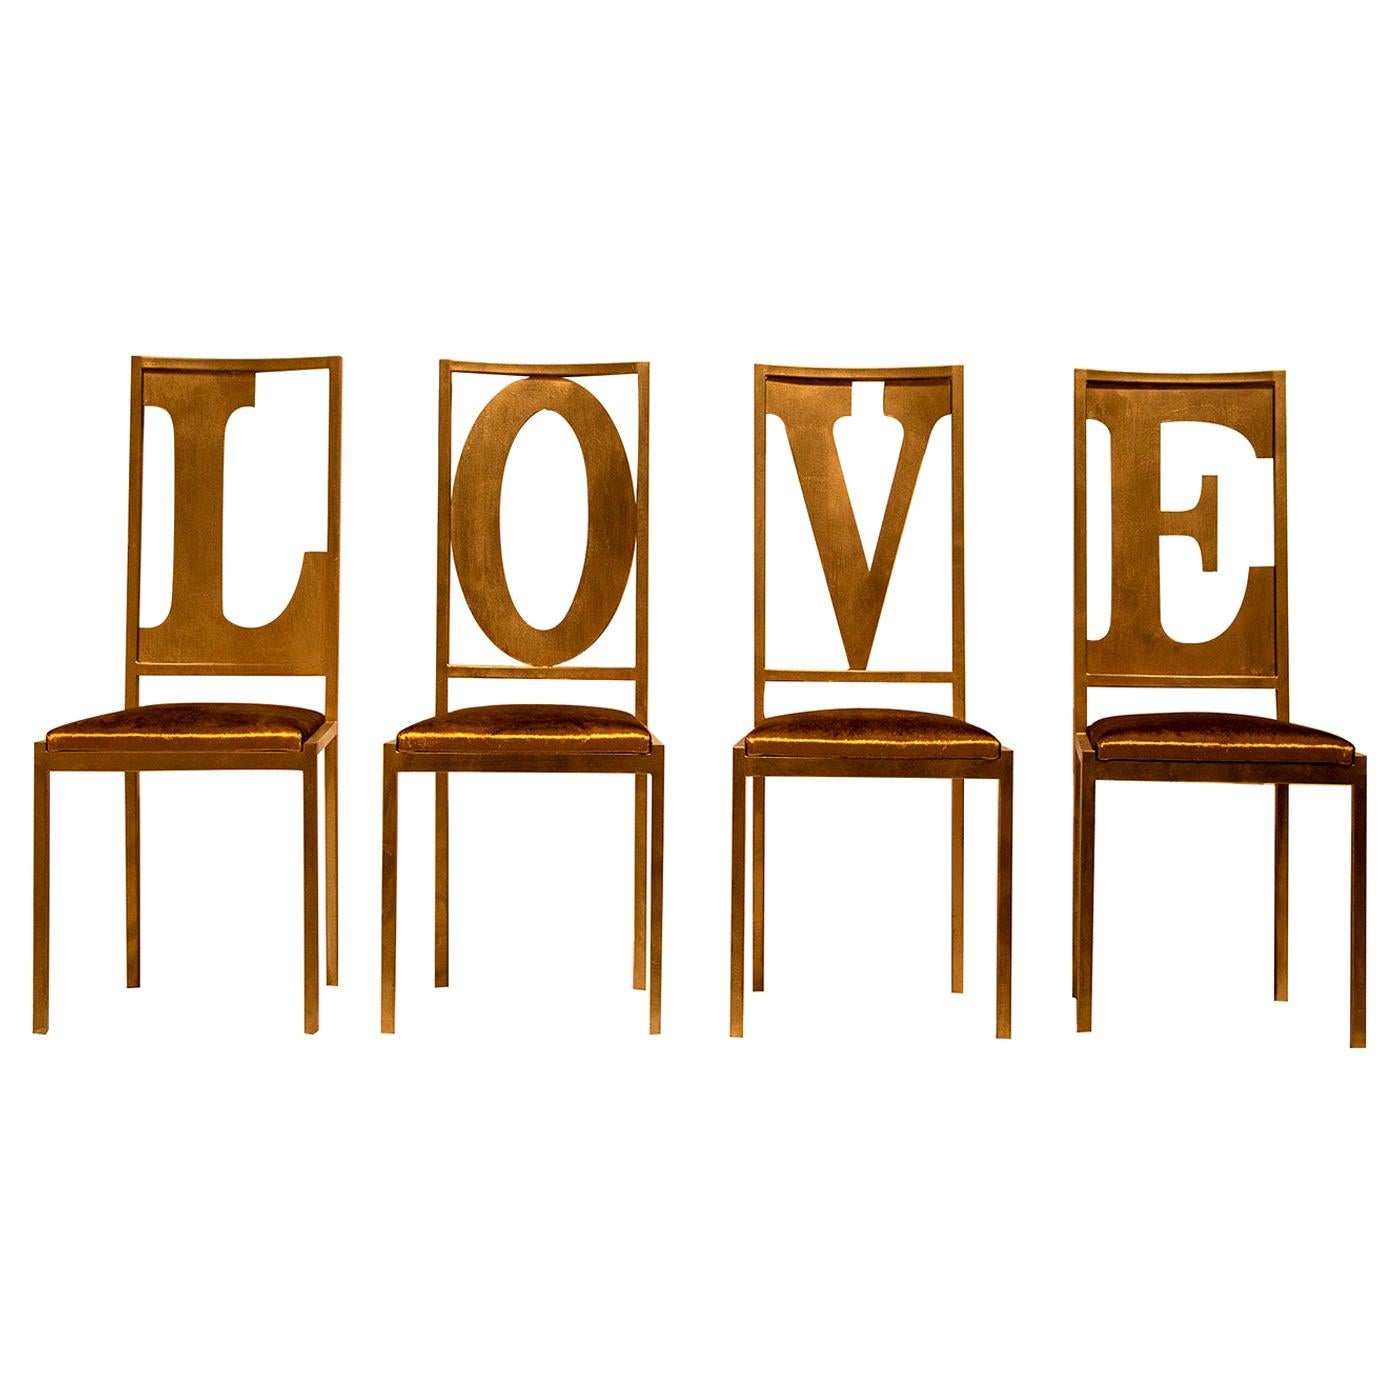 Gold Love Set of 4 Letter Chairs